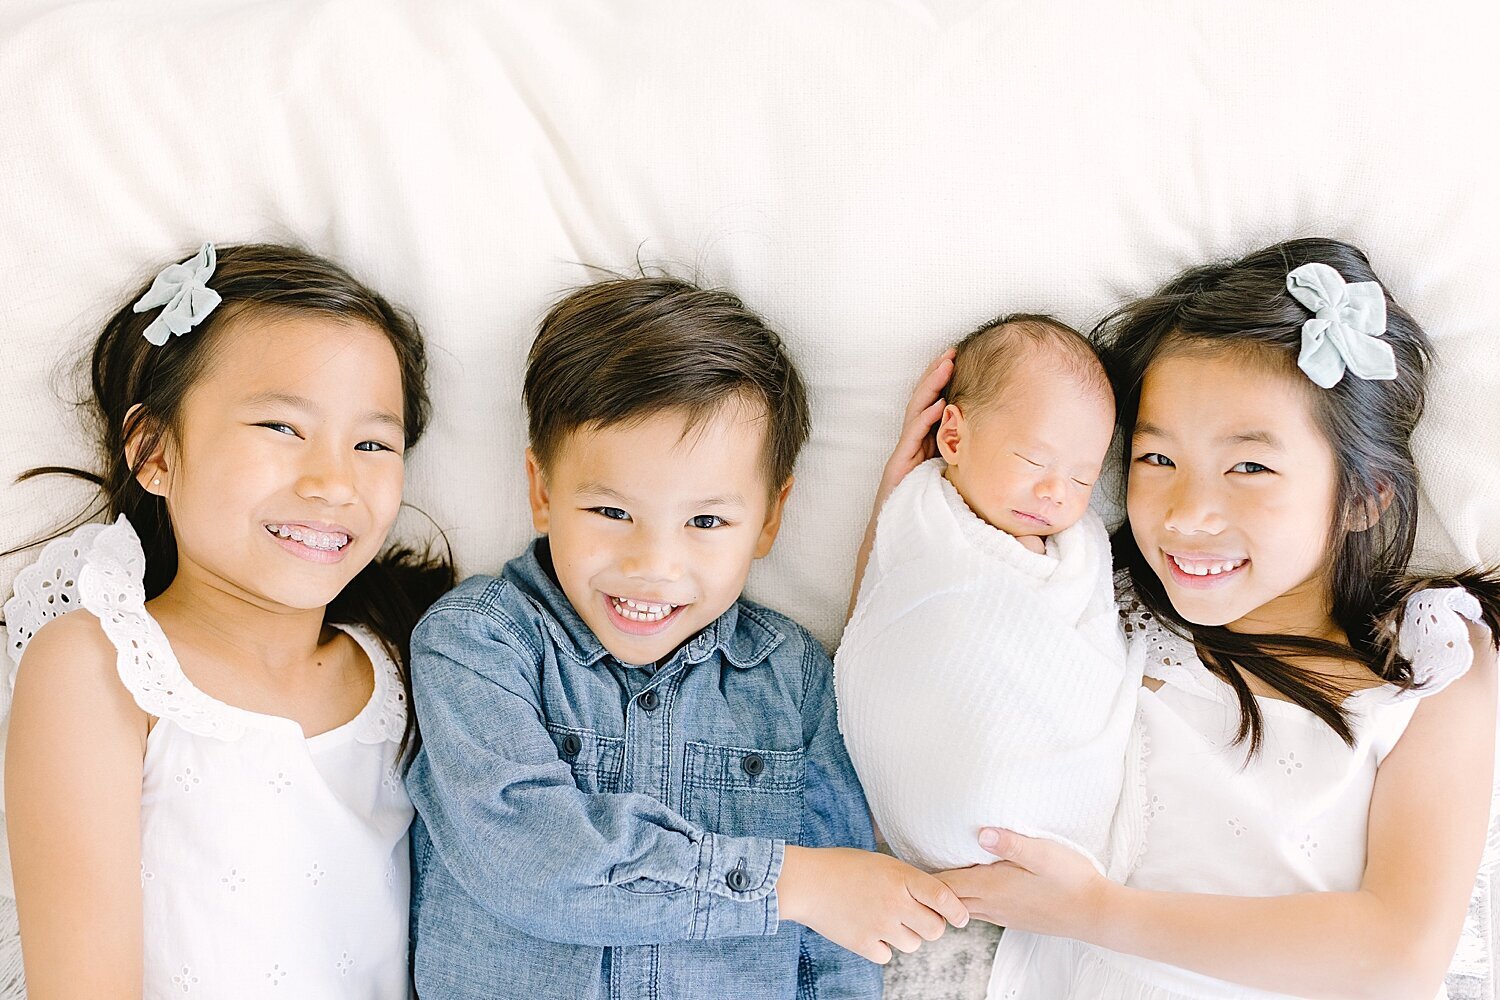 Four siblings laying together for baby brothers newborn photos with Ambre Williams in Newport Beach, CA.